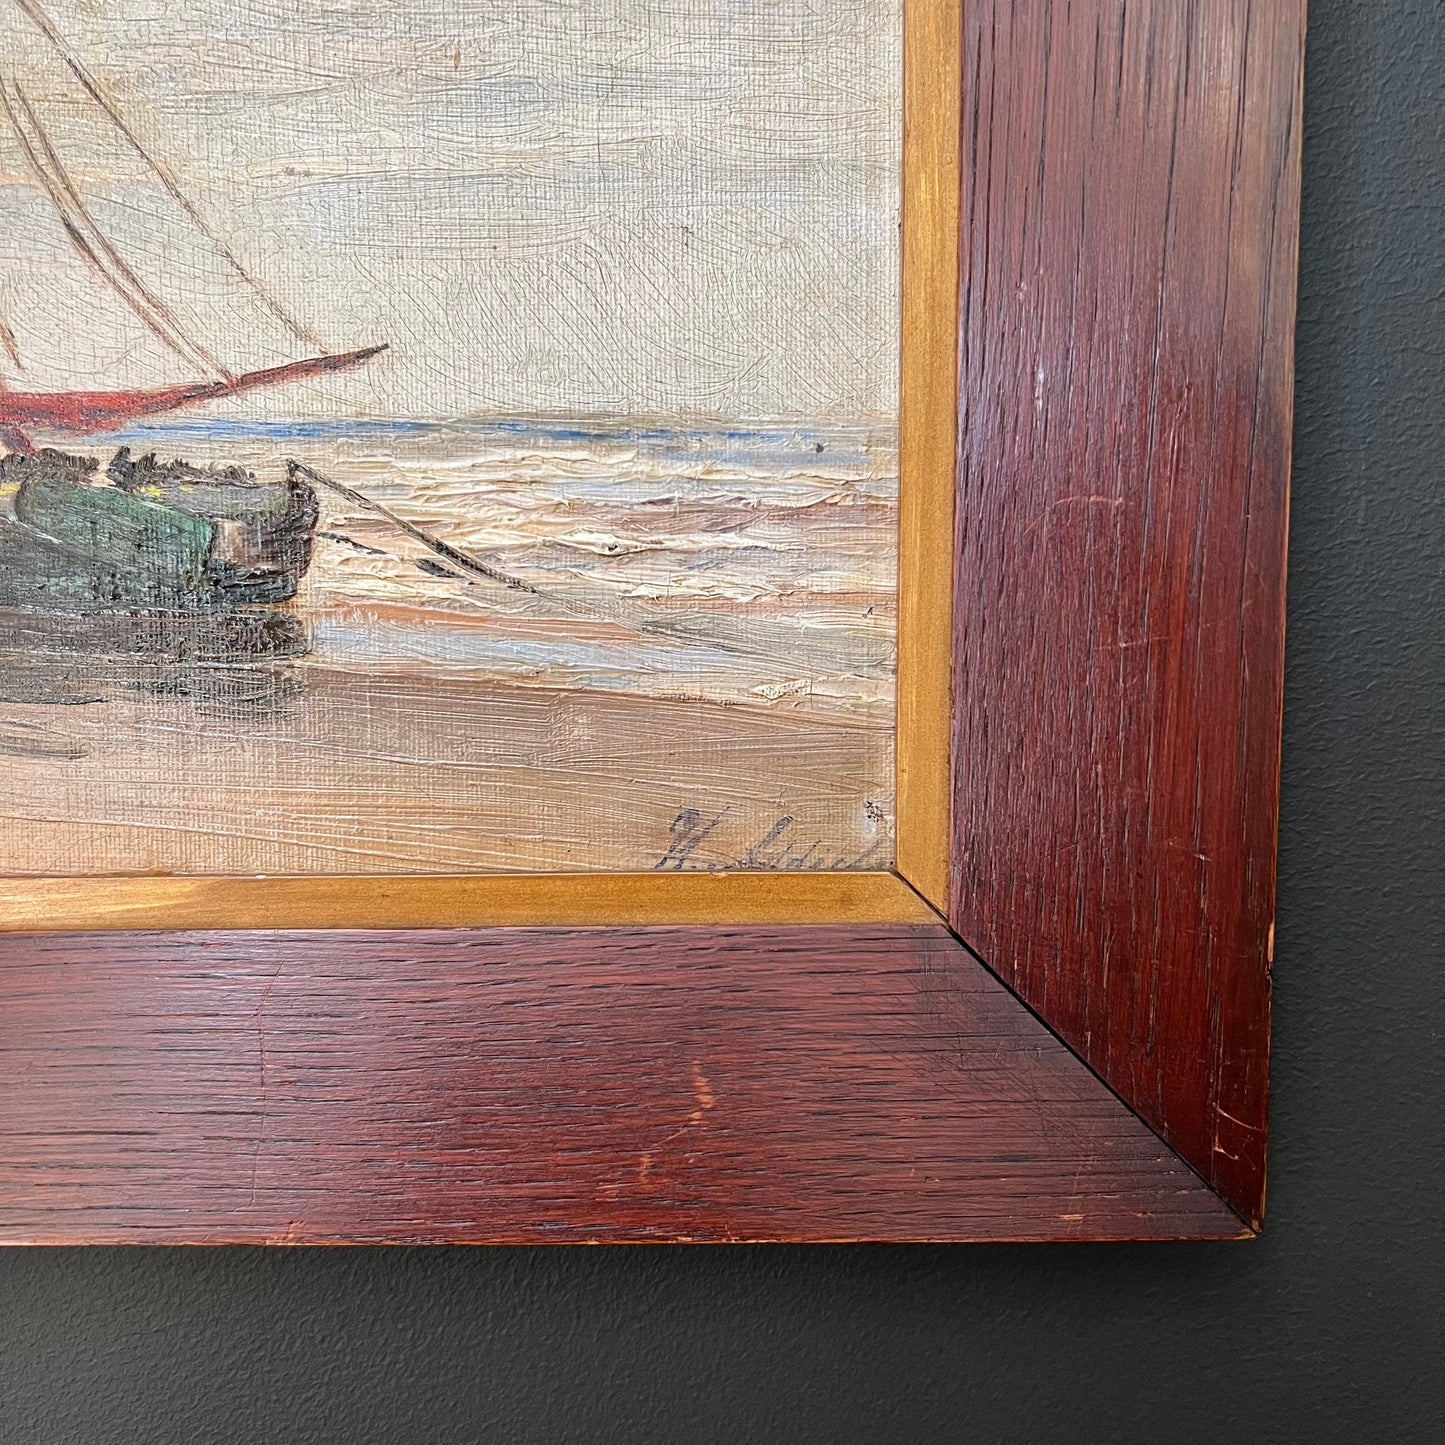 Antique Oil Painting Sailing Boats on the Seashore c1920